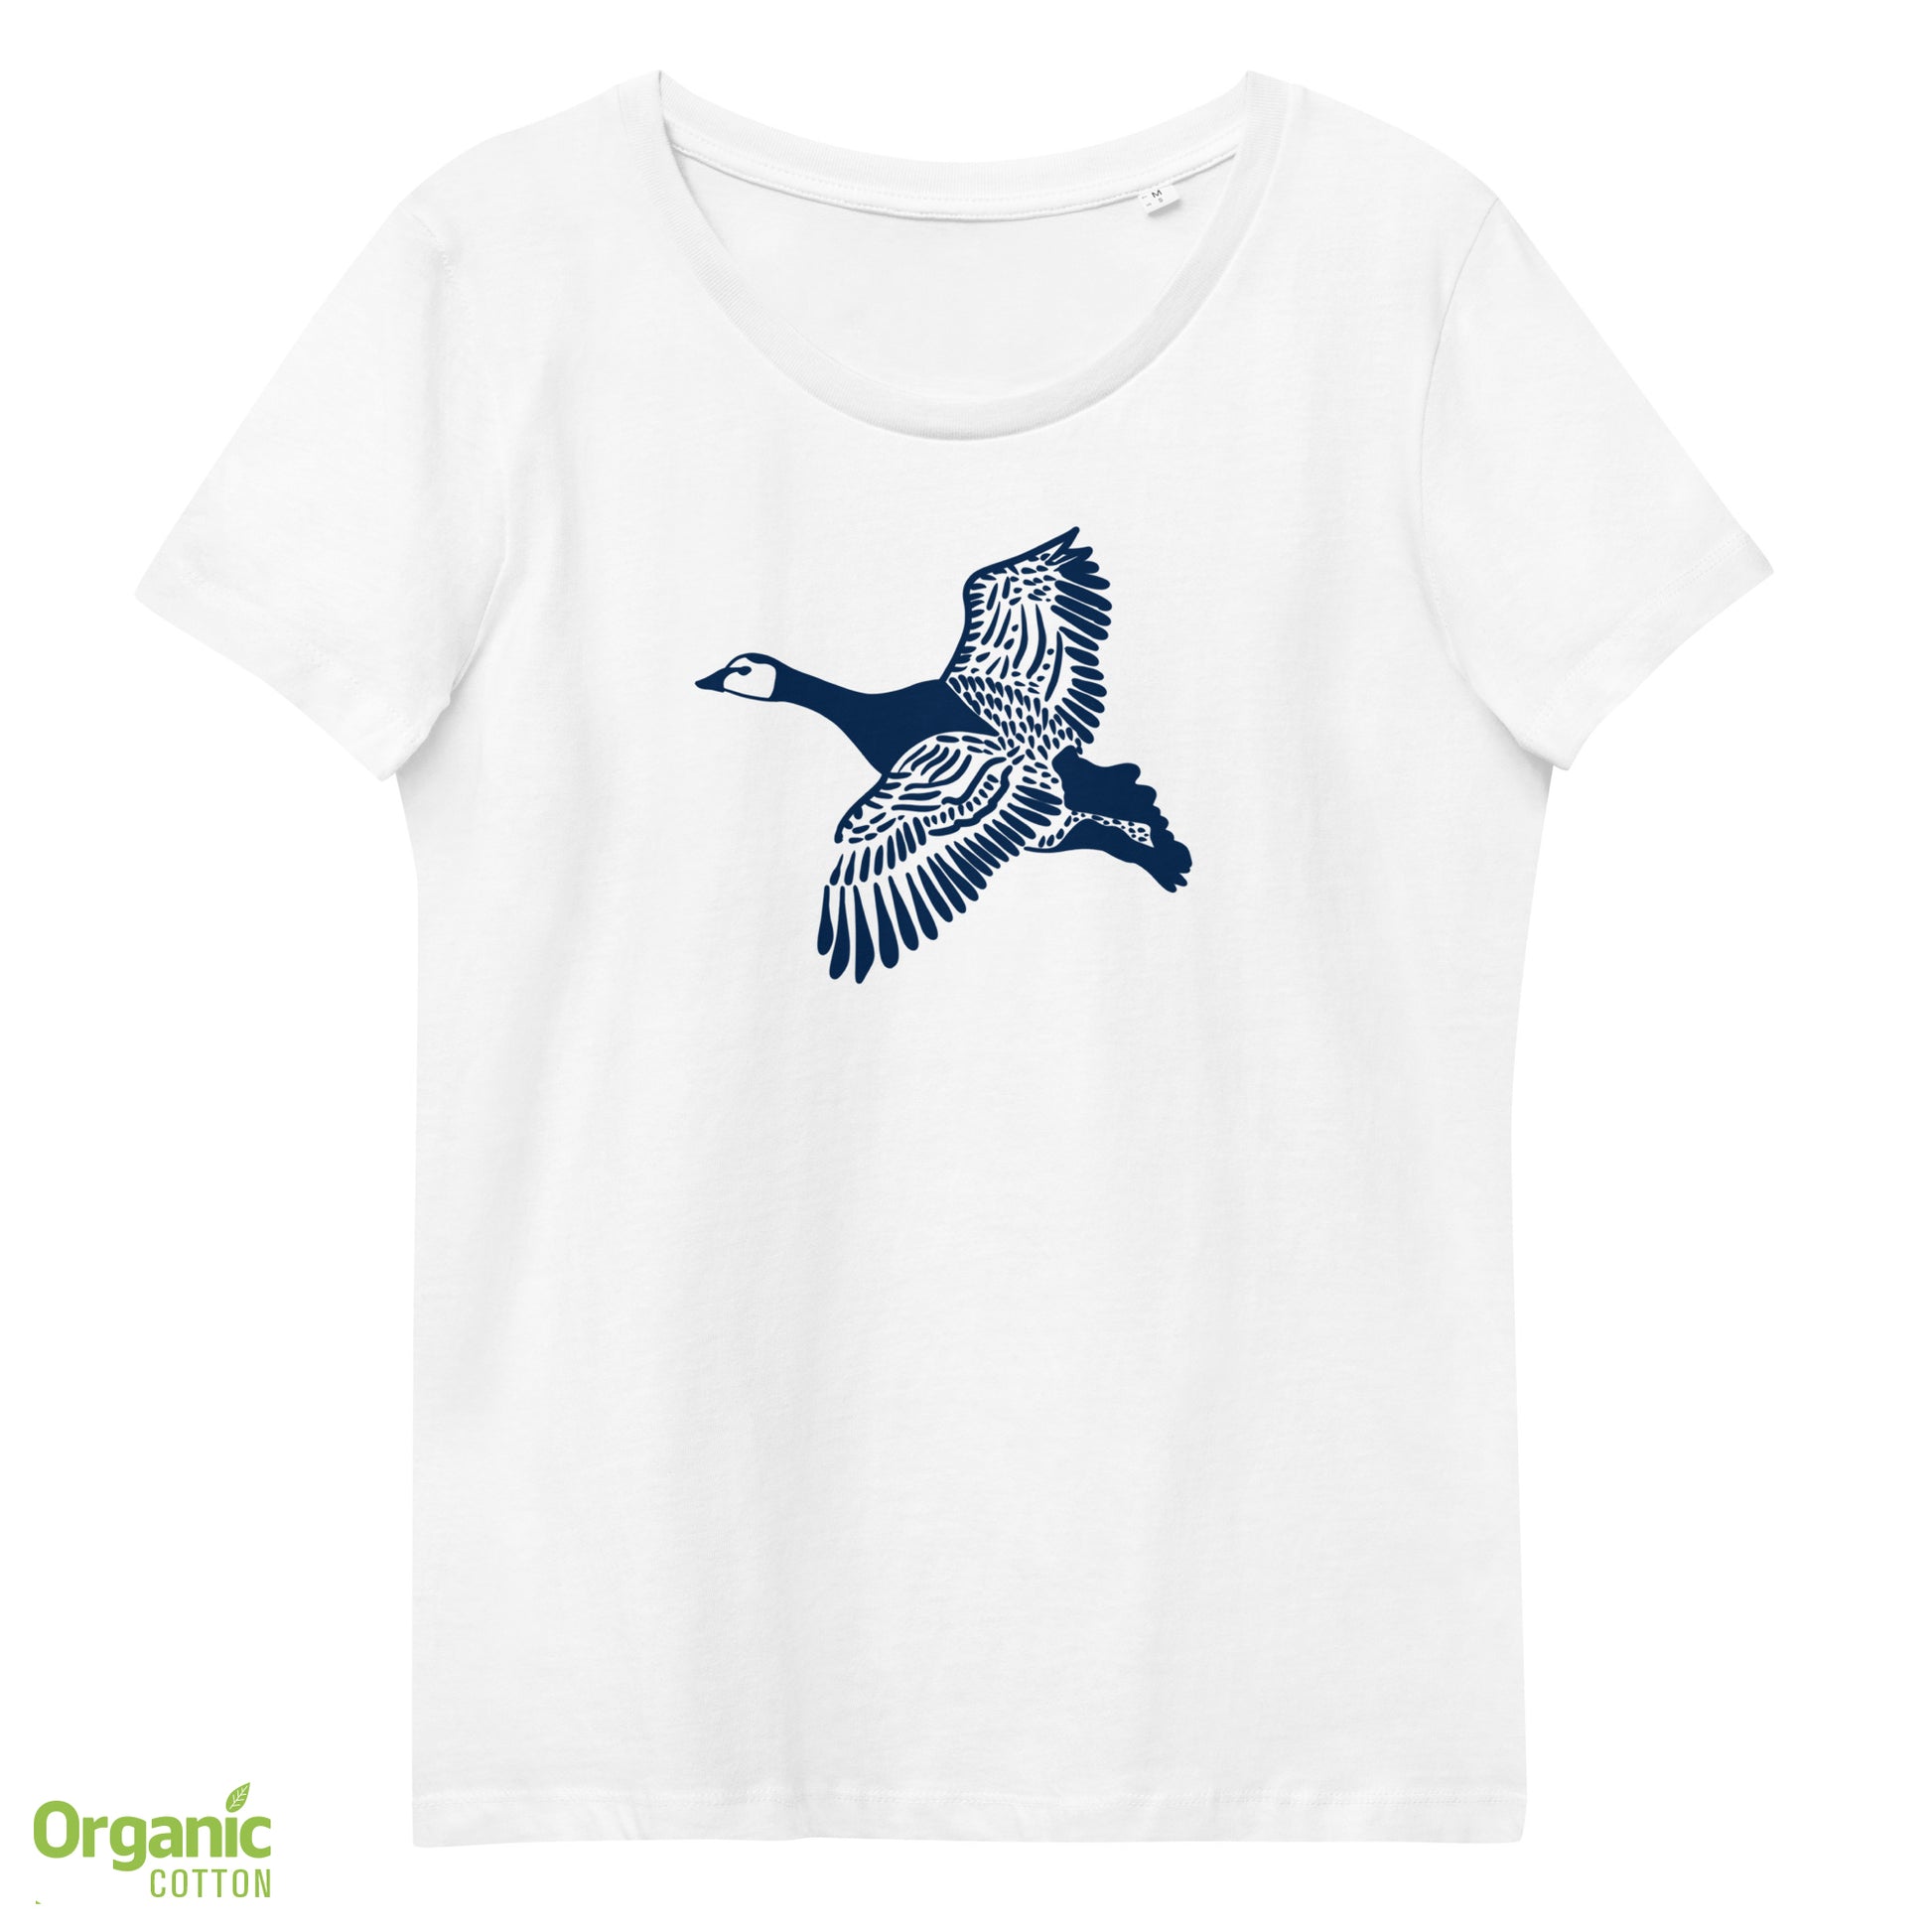 Oh my geese - Women's fitted eco tee - Shirts & Tops- Print N Stuff - [designed in Turku FInland]